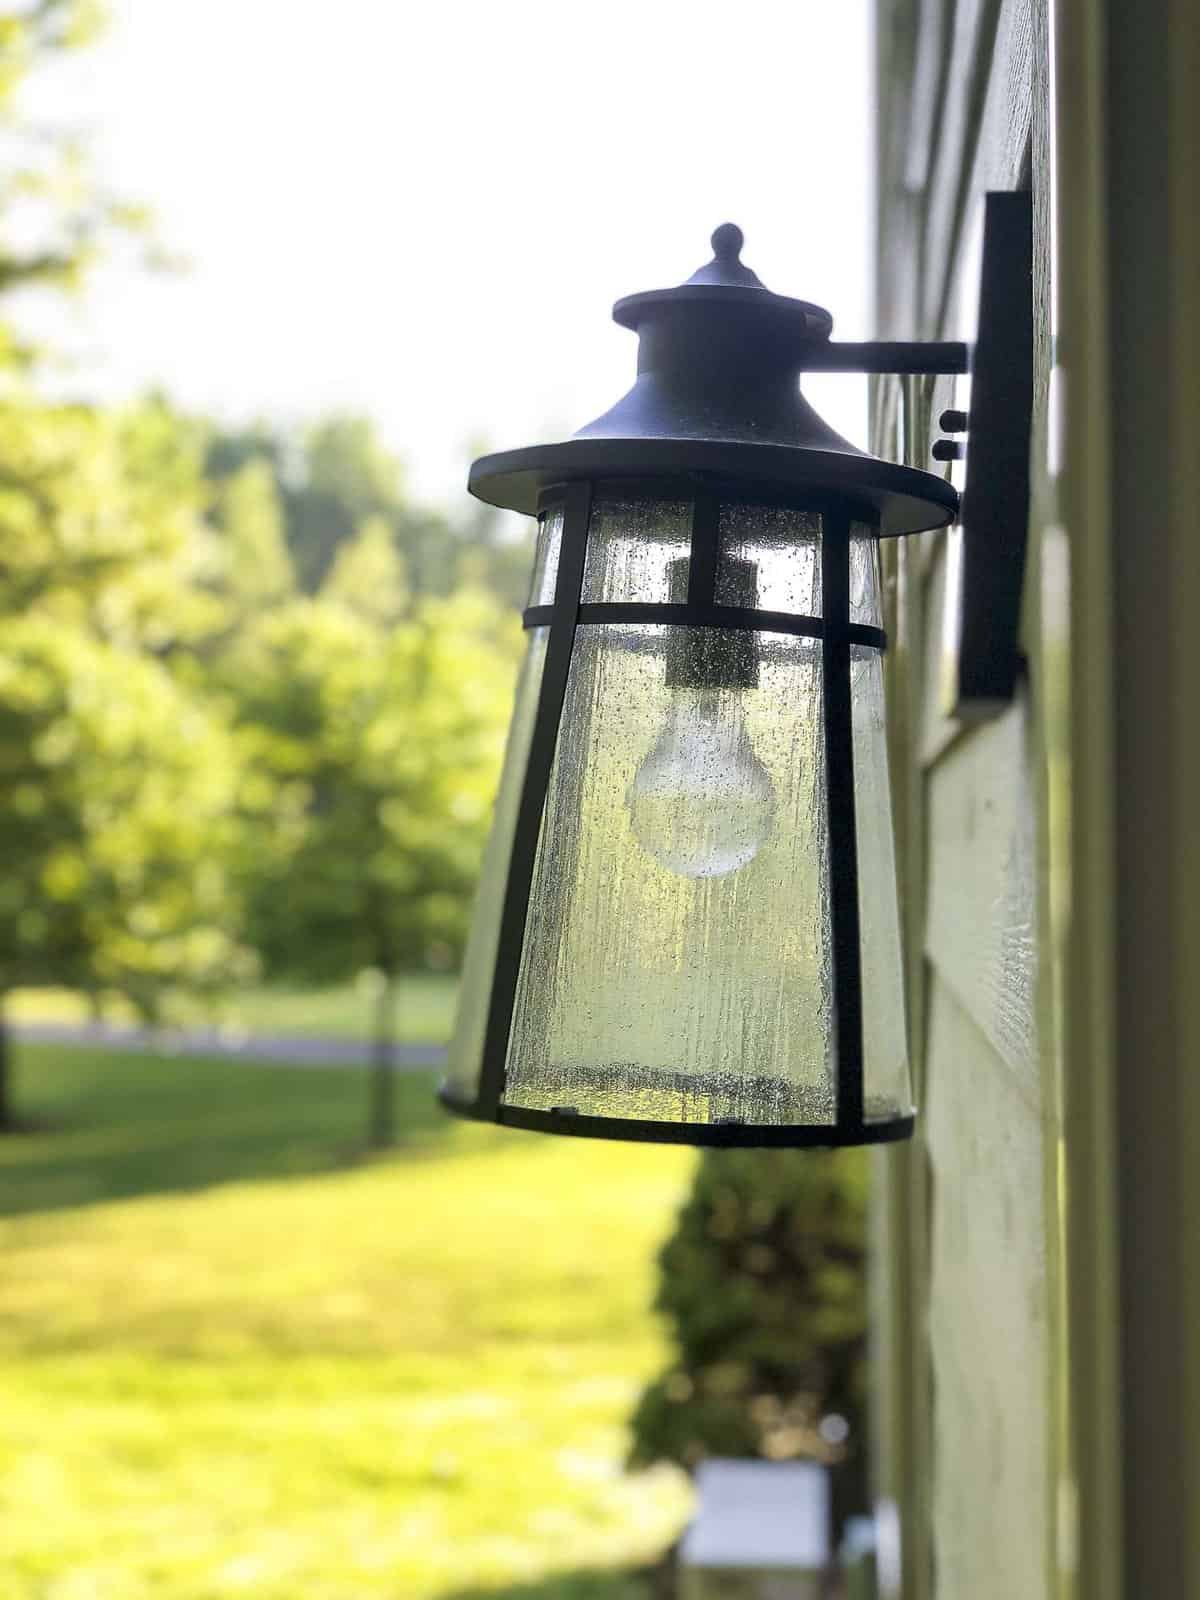 Are you looking for an easy and affordable way to update your home exterior? I modernized our 1990s ranch in one afternoon with affordable modern farmhouse outdoor lighting! Read more to see the transformation!